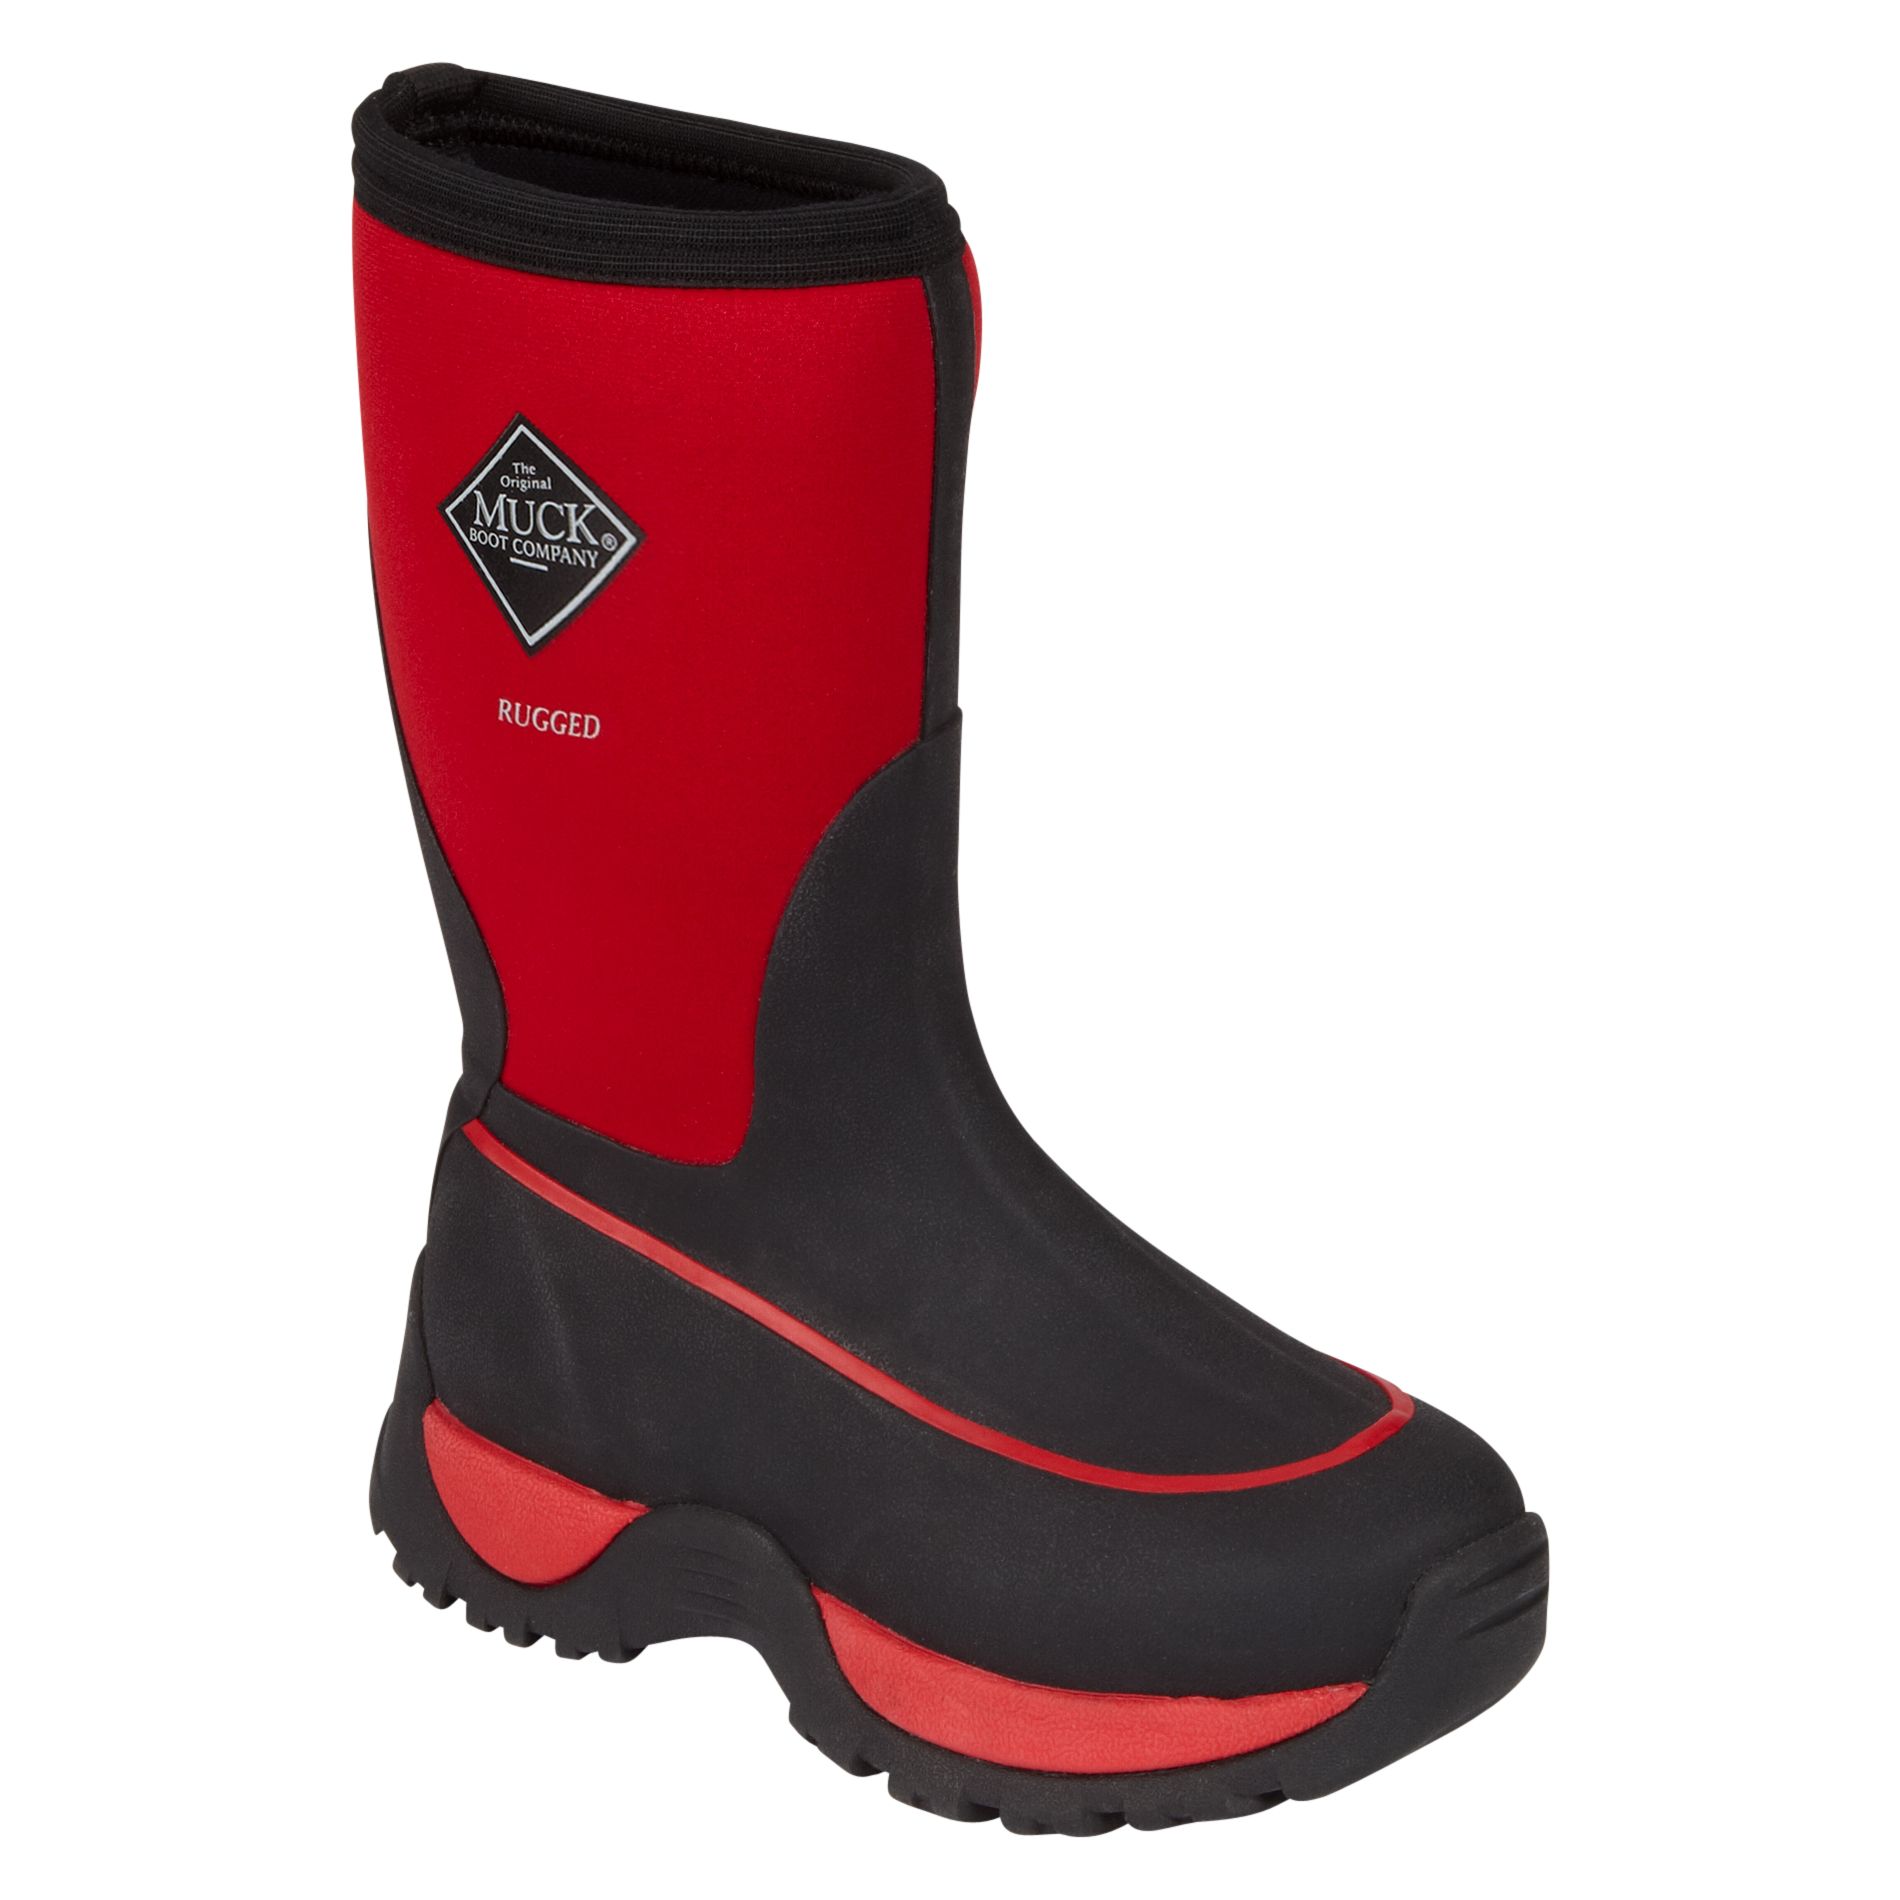 The Original Muck Boot Company Boy's Boot Rugged - Red